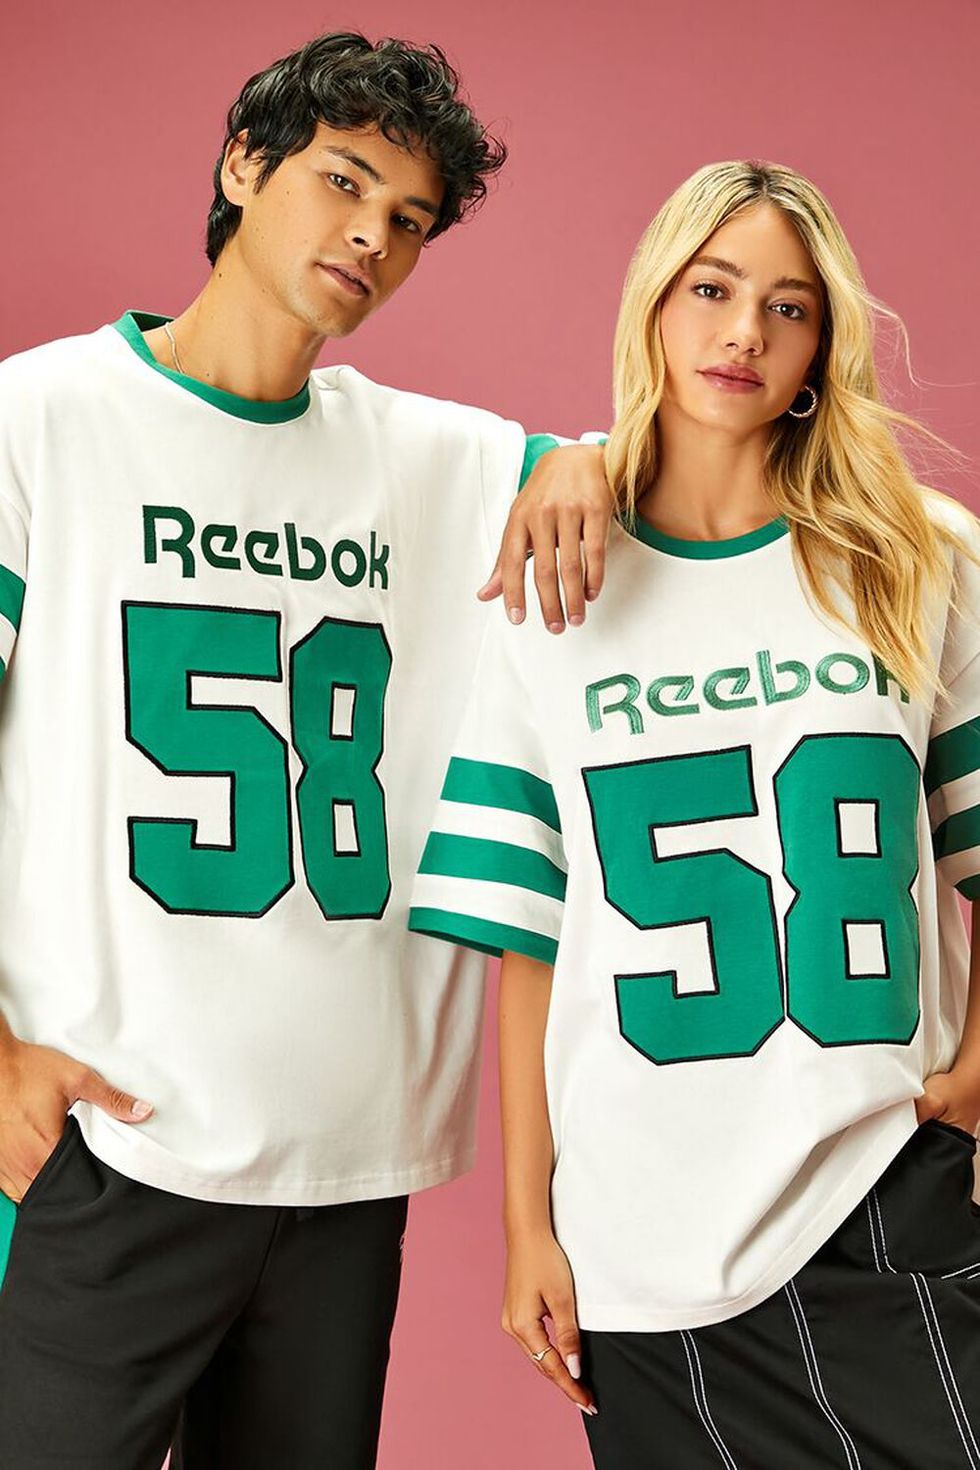 Forever 21 x Reebok Collection - Today's Parent